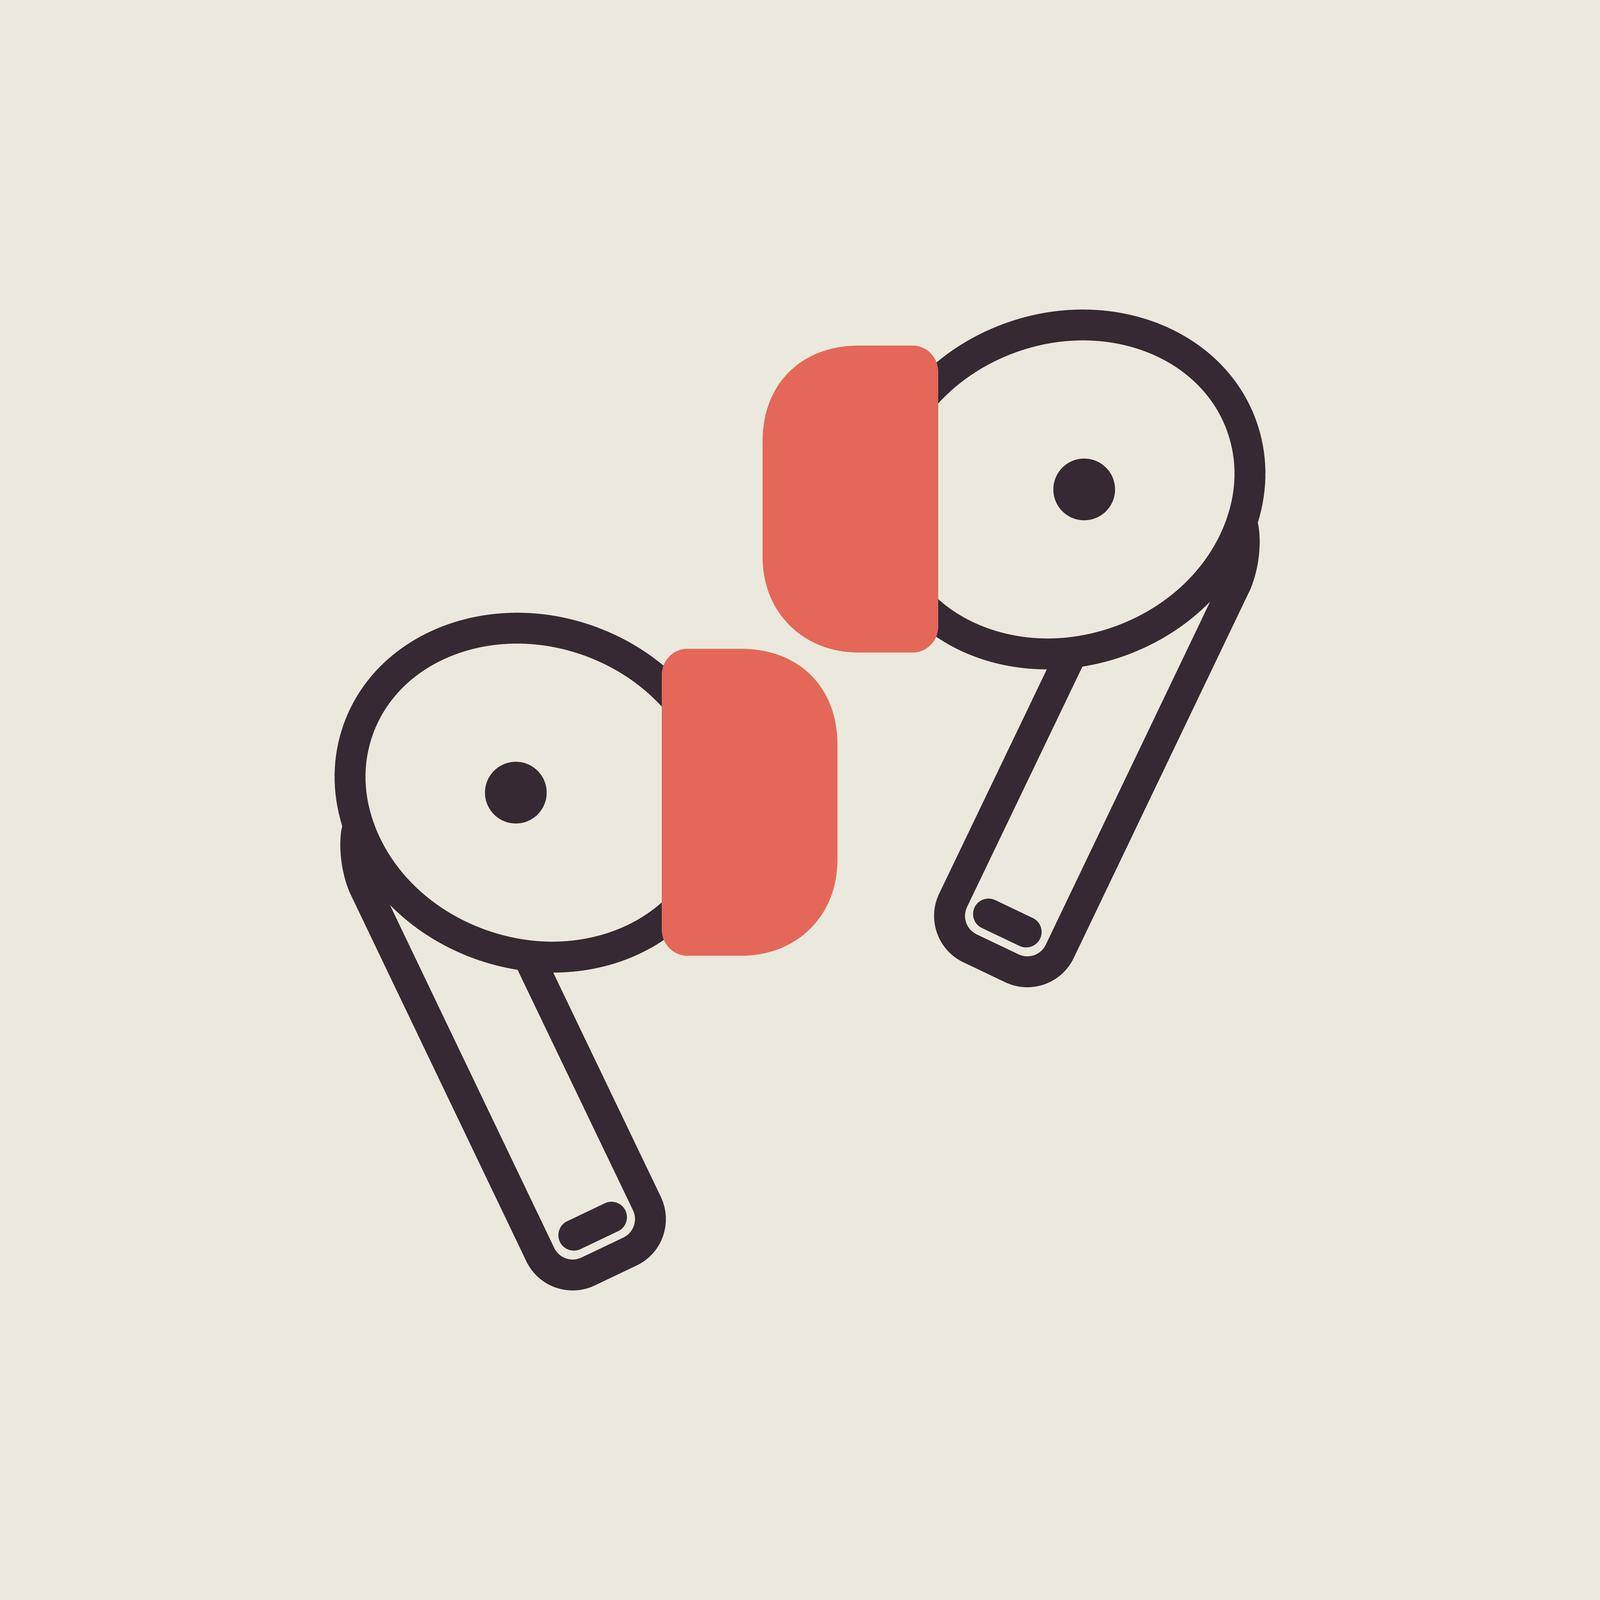 Pair of wireless earbud headphones isolated vector icon. Graph symbol for music and sound web site and apps design, logo, app, UI